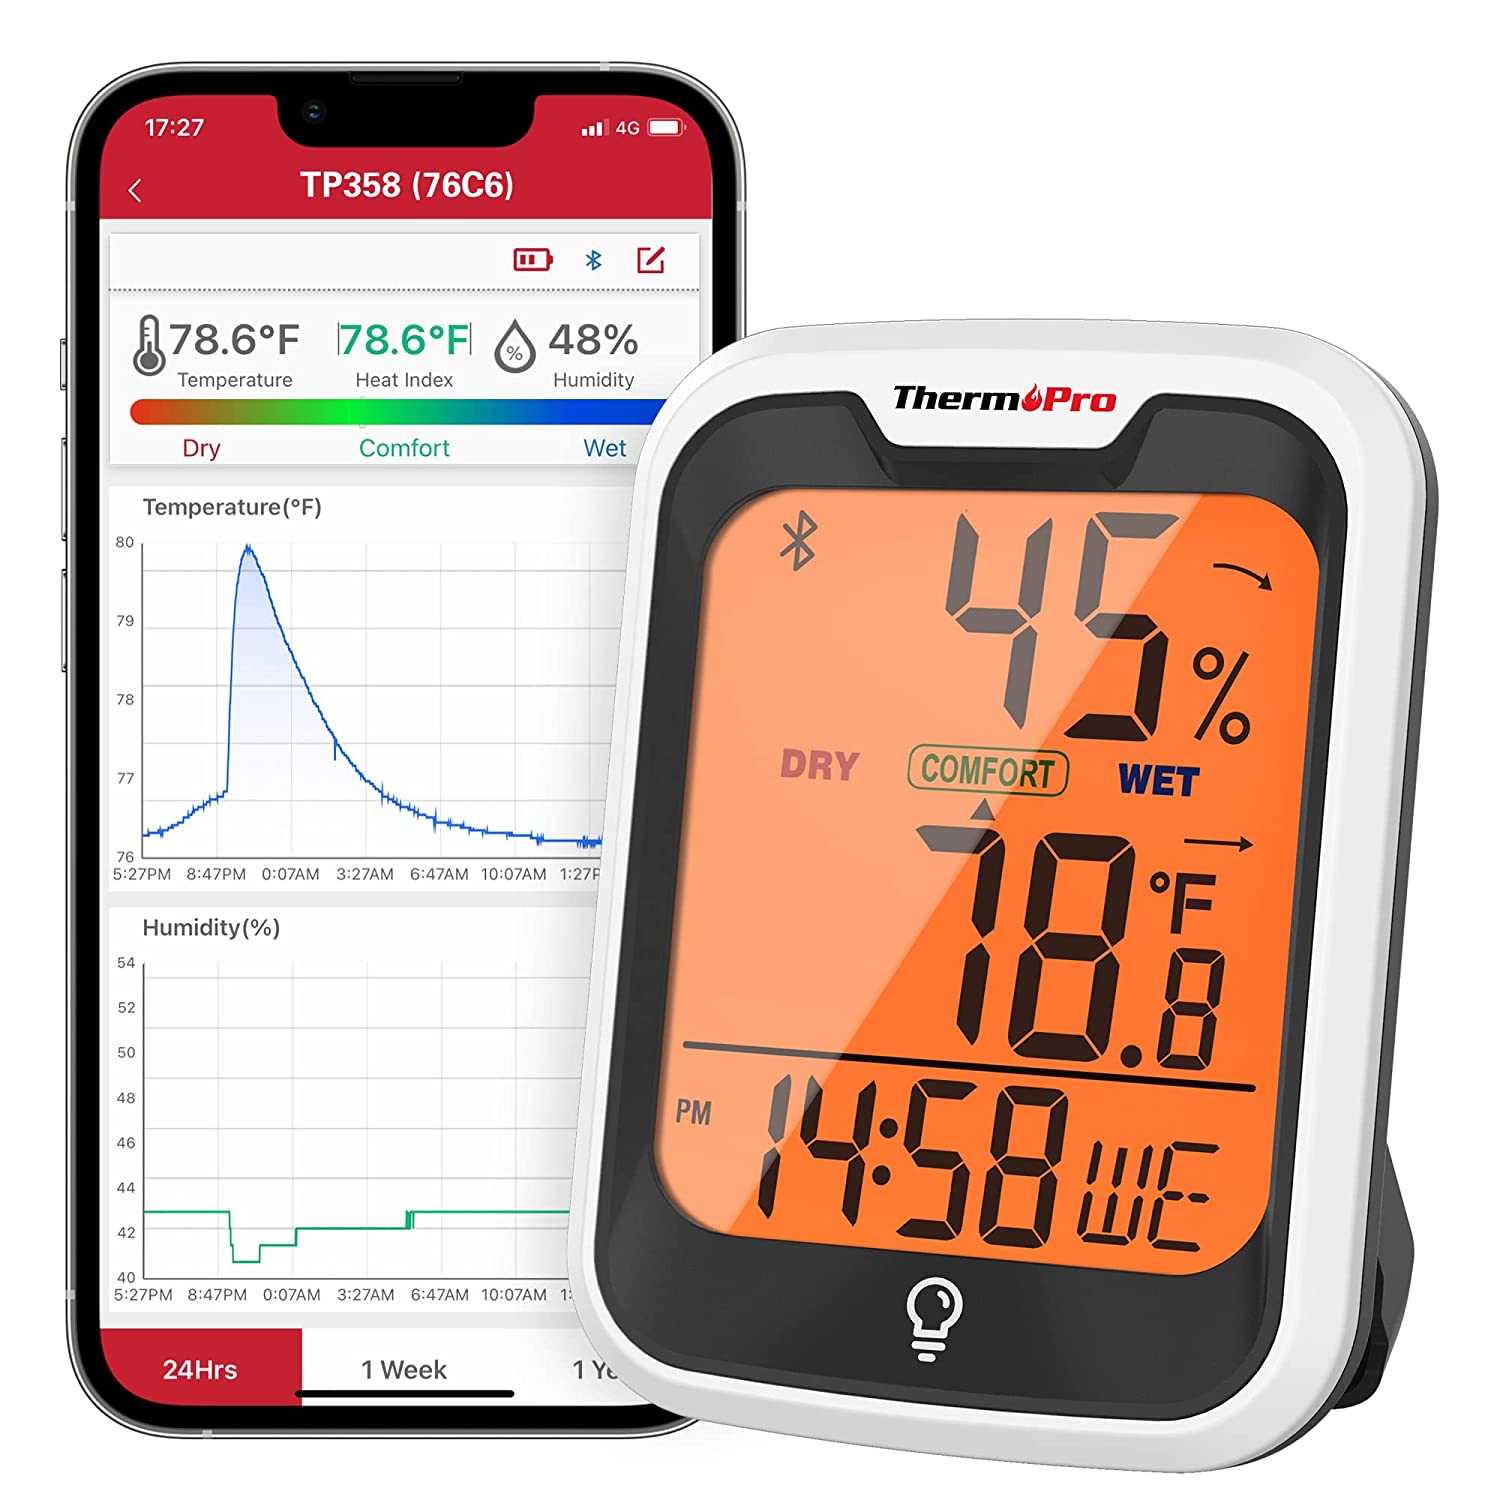 To What Temperature Should I Cook My Meat? – ThermoPro